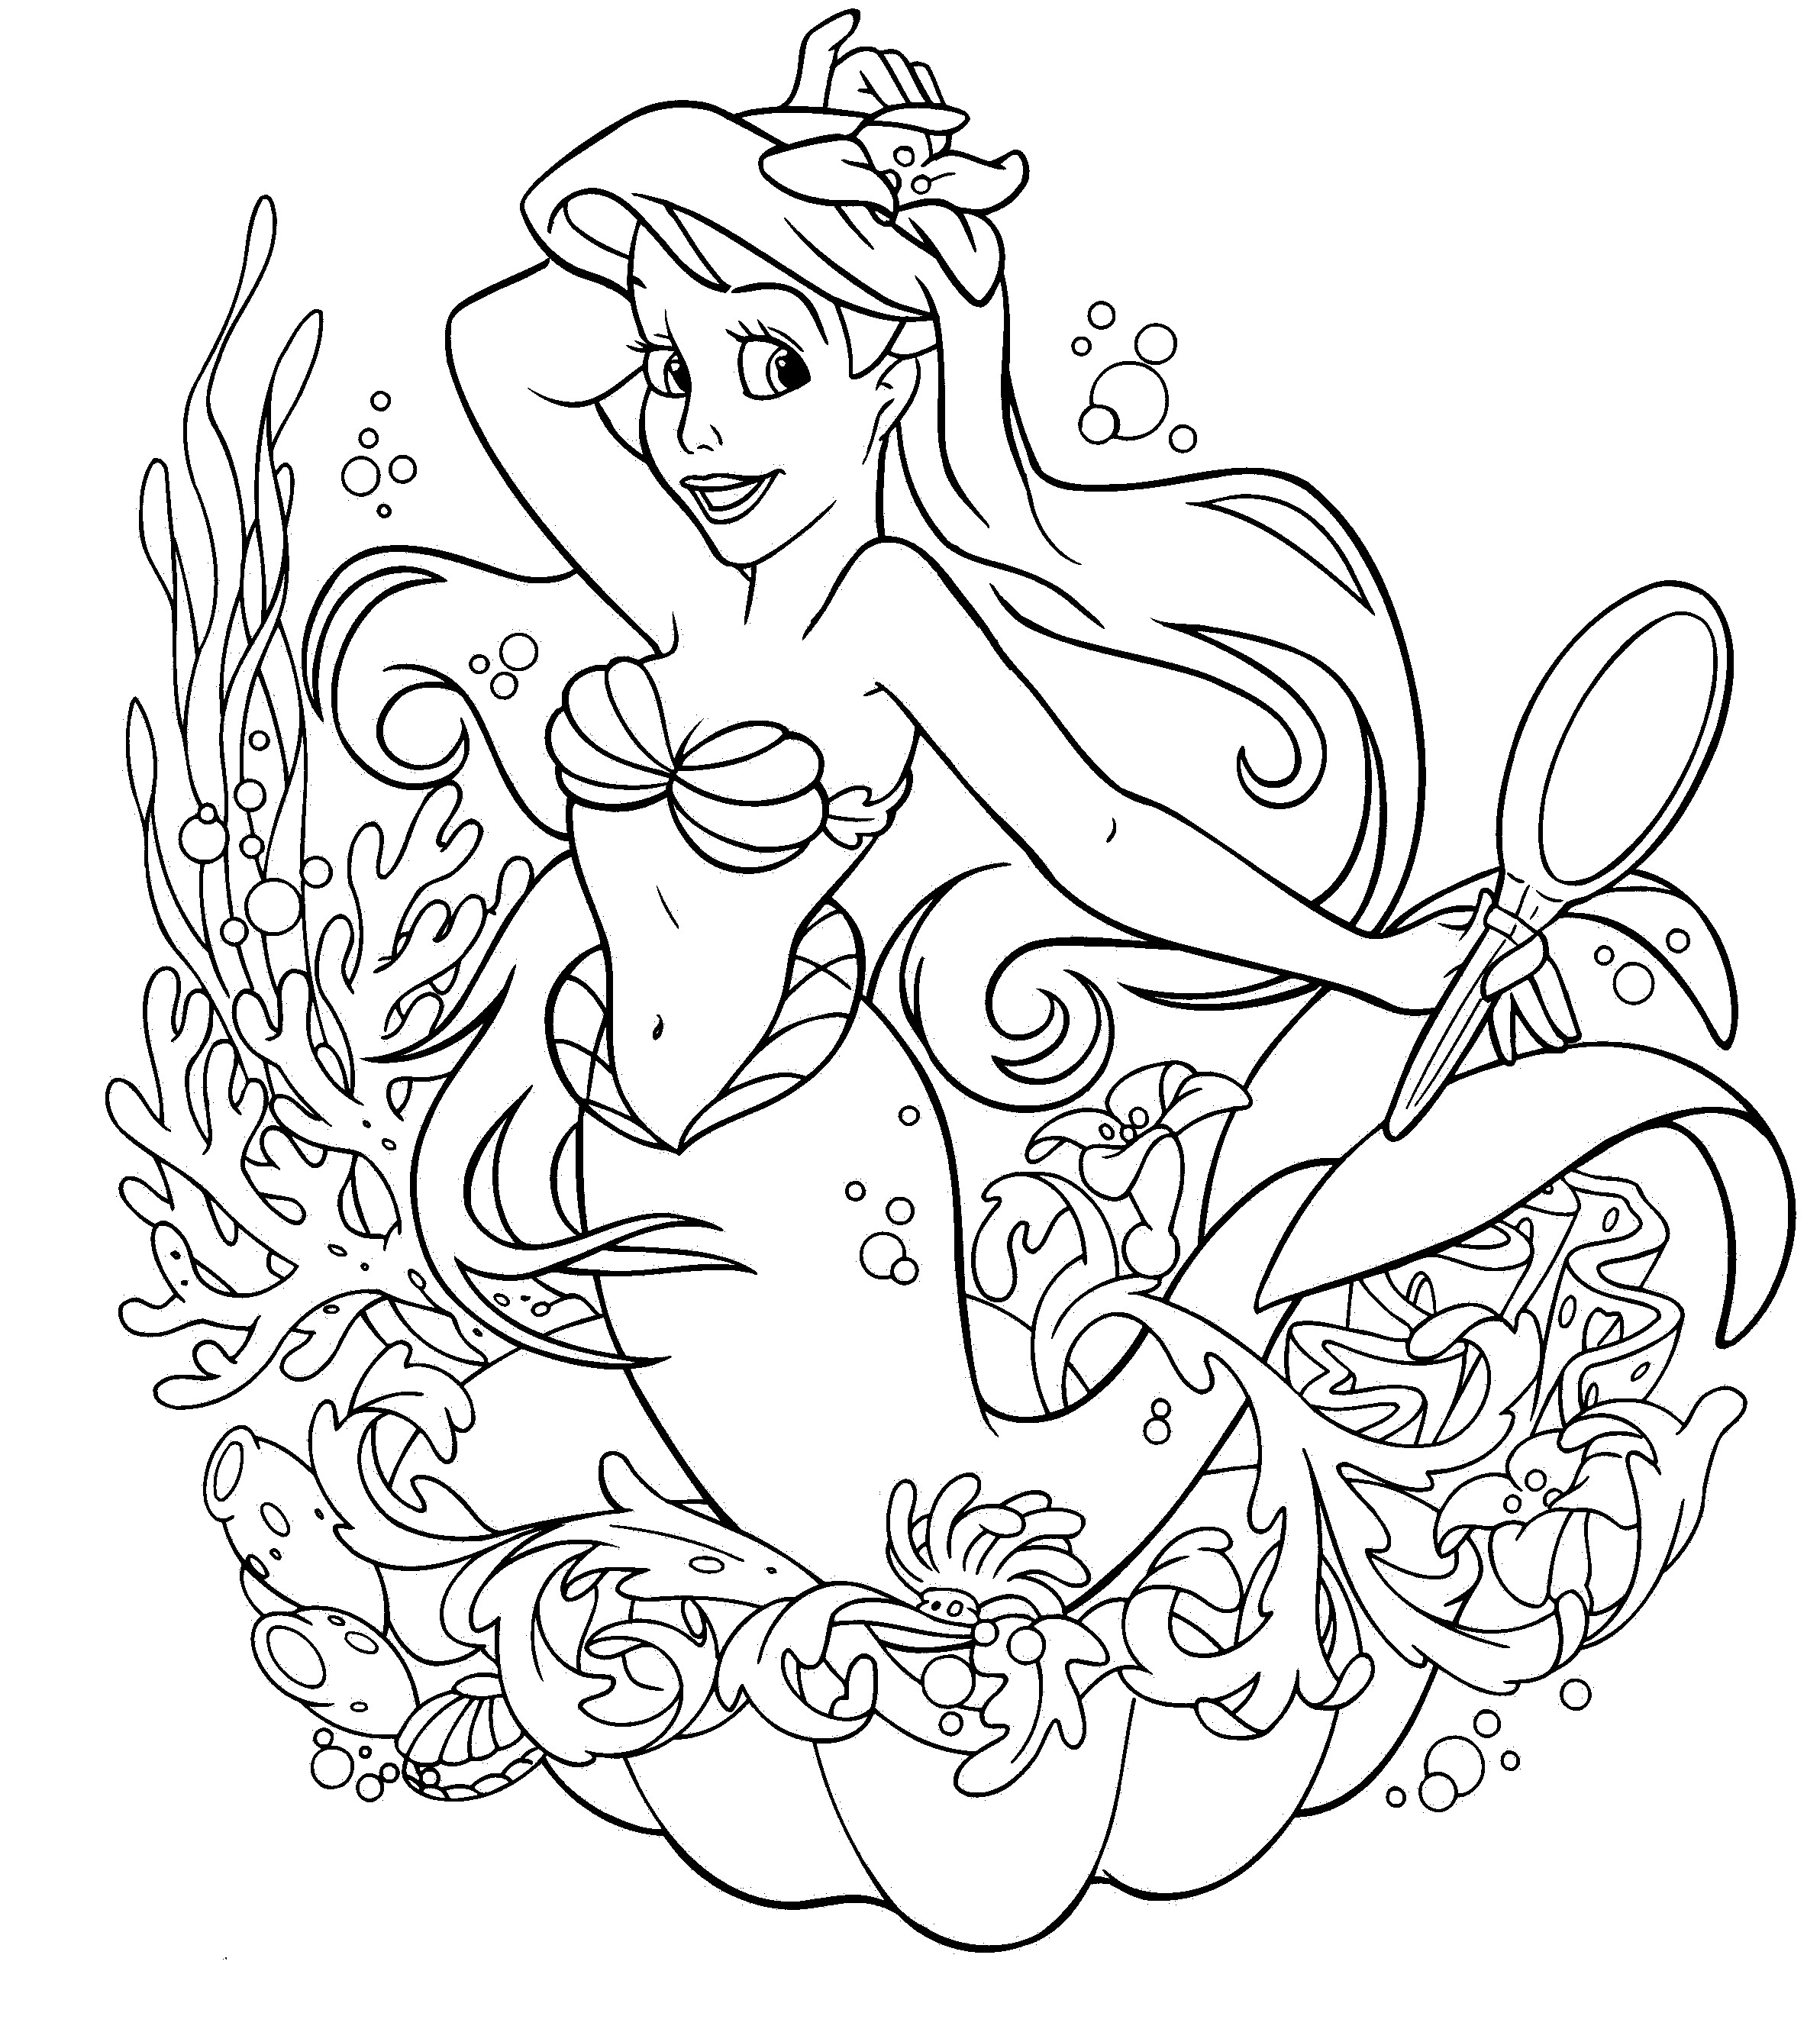 1000 Coloring Pages For Girls
 1000 images about Colouring on Pinterest